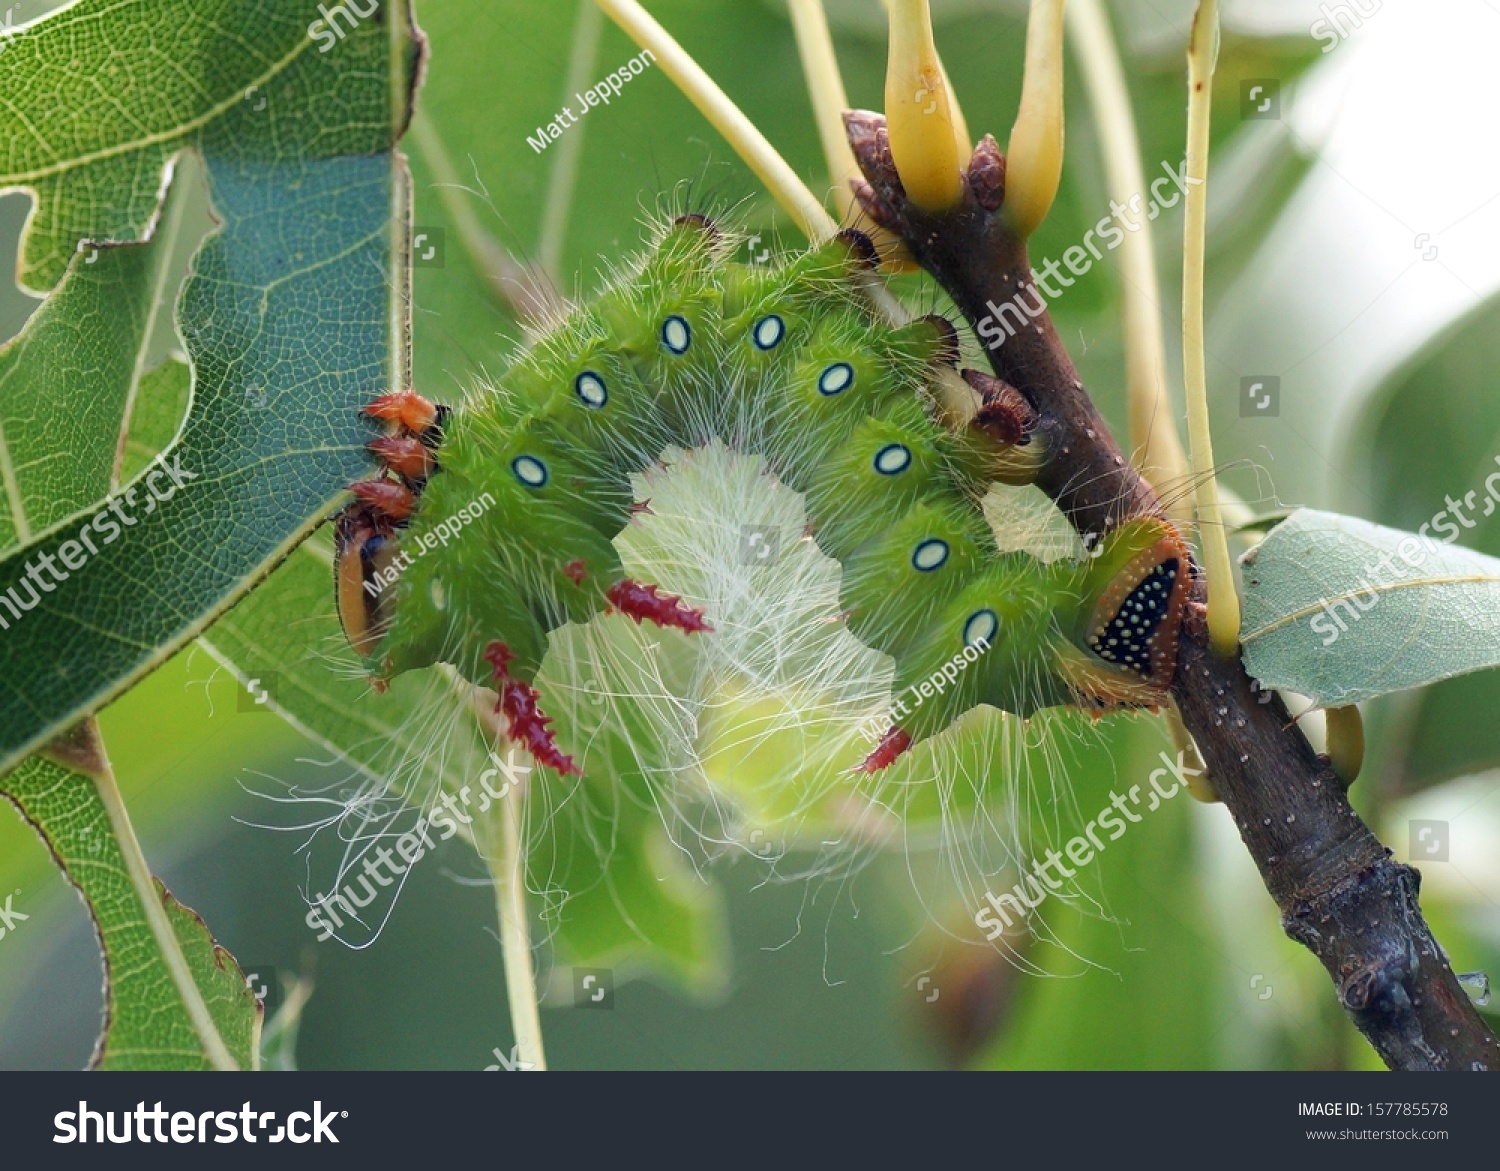 Large Polymorphic Imperial Moth Caterpillar Comes Stock Photo Shutterstock